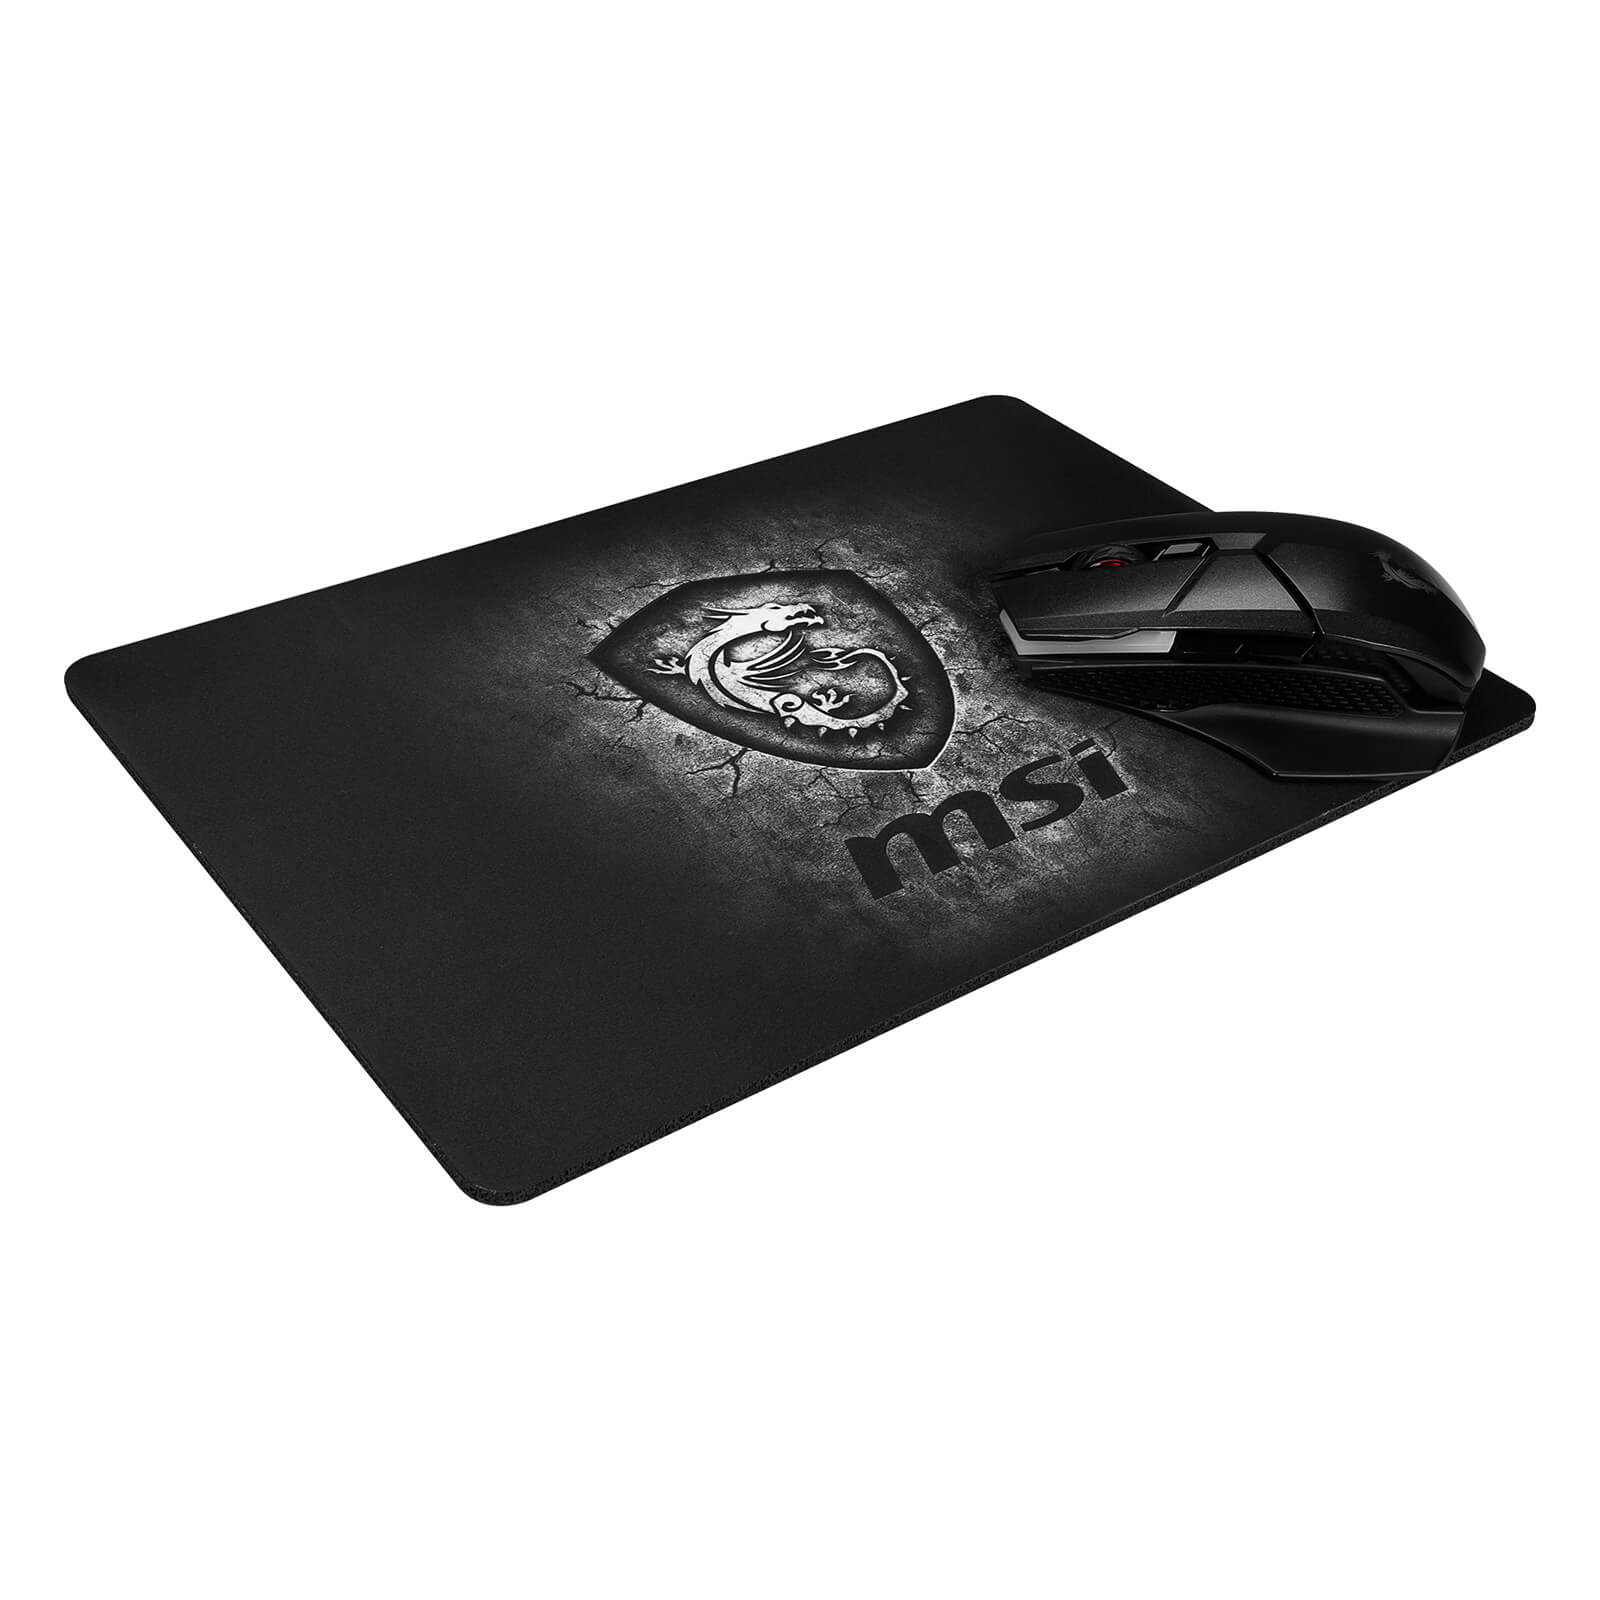 MSI Agility GD20 Pro Gaming Mouse Pad - Black